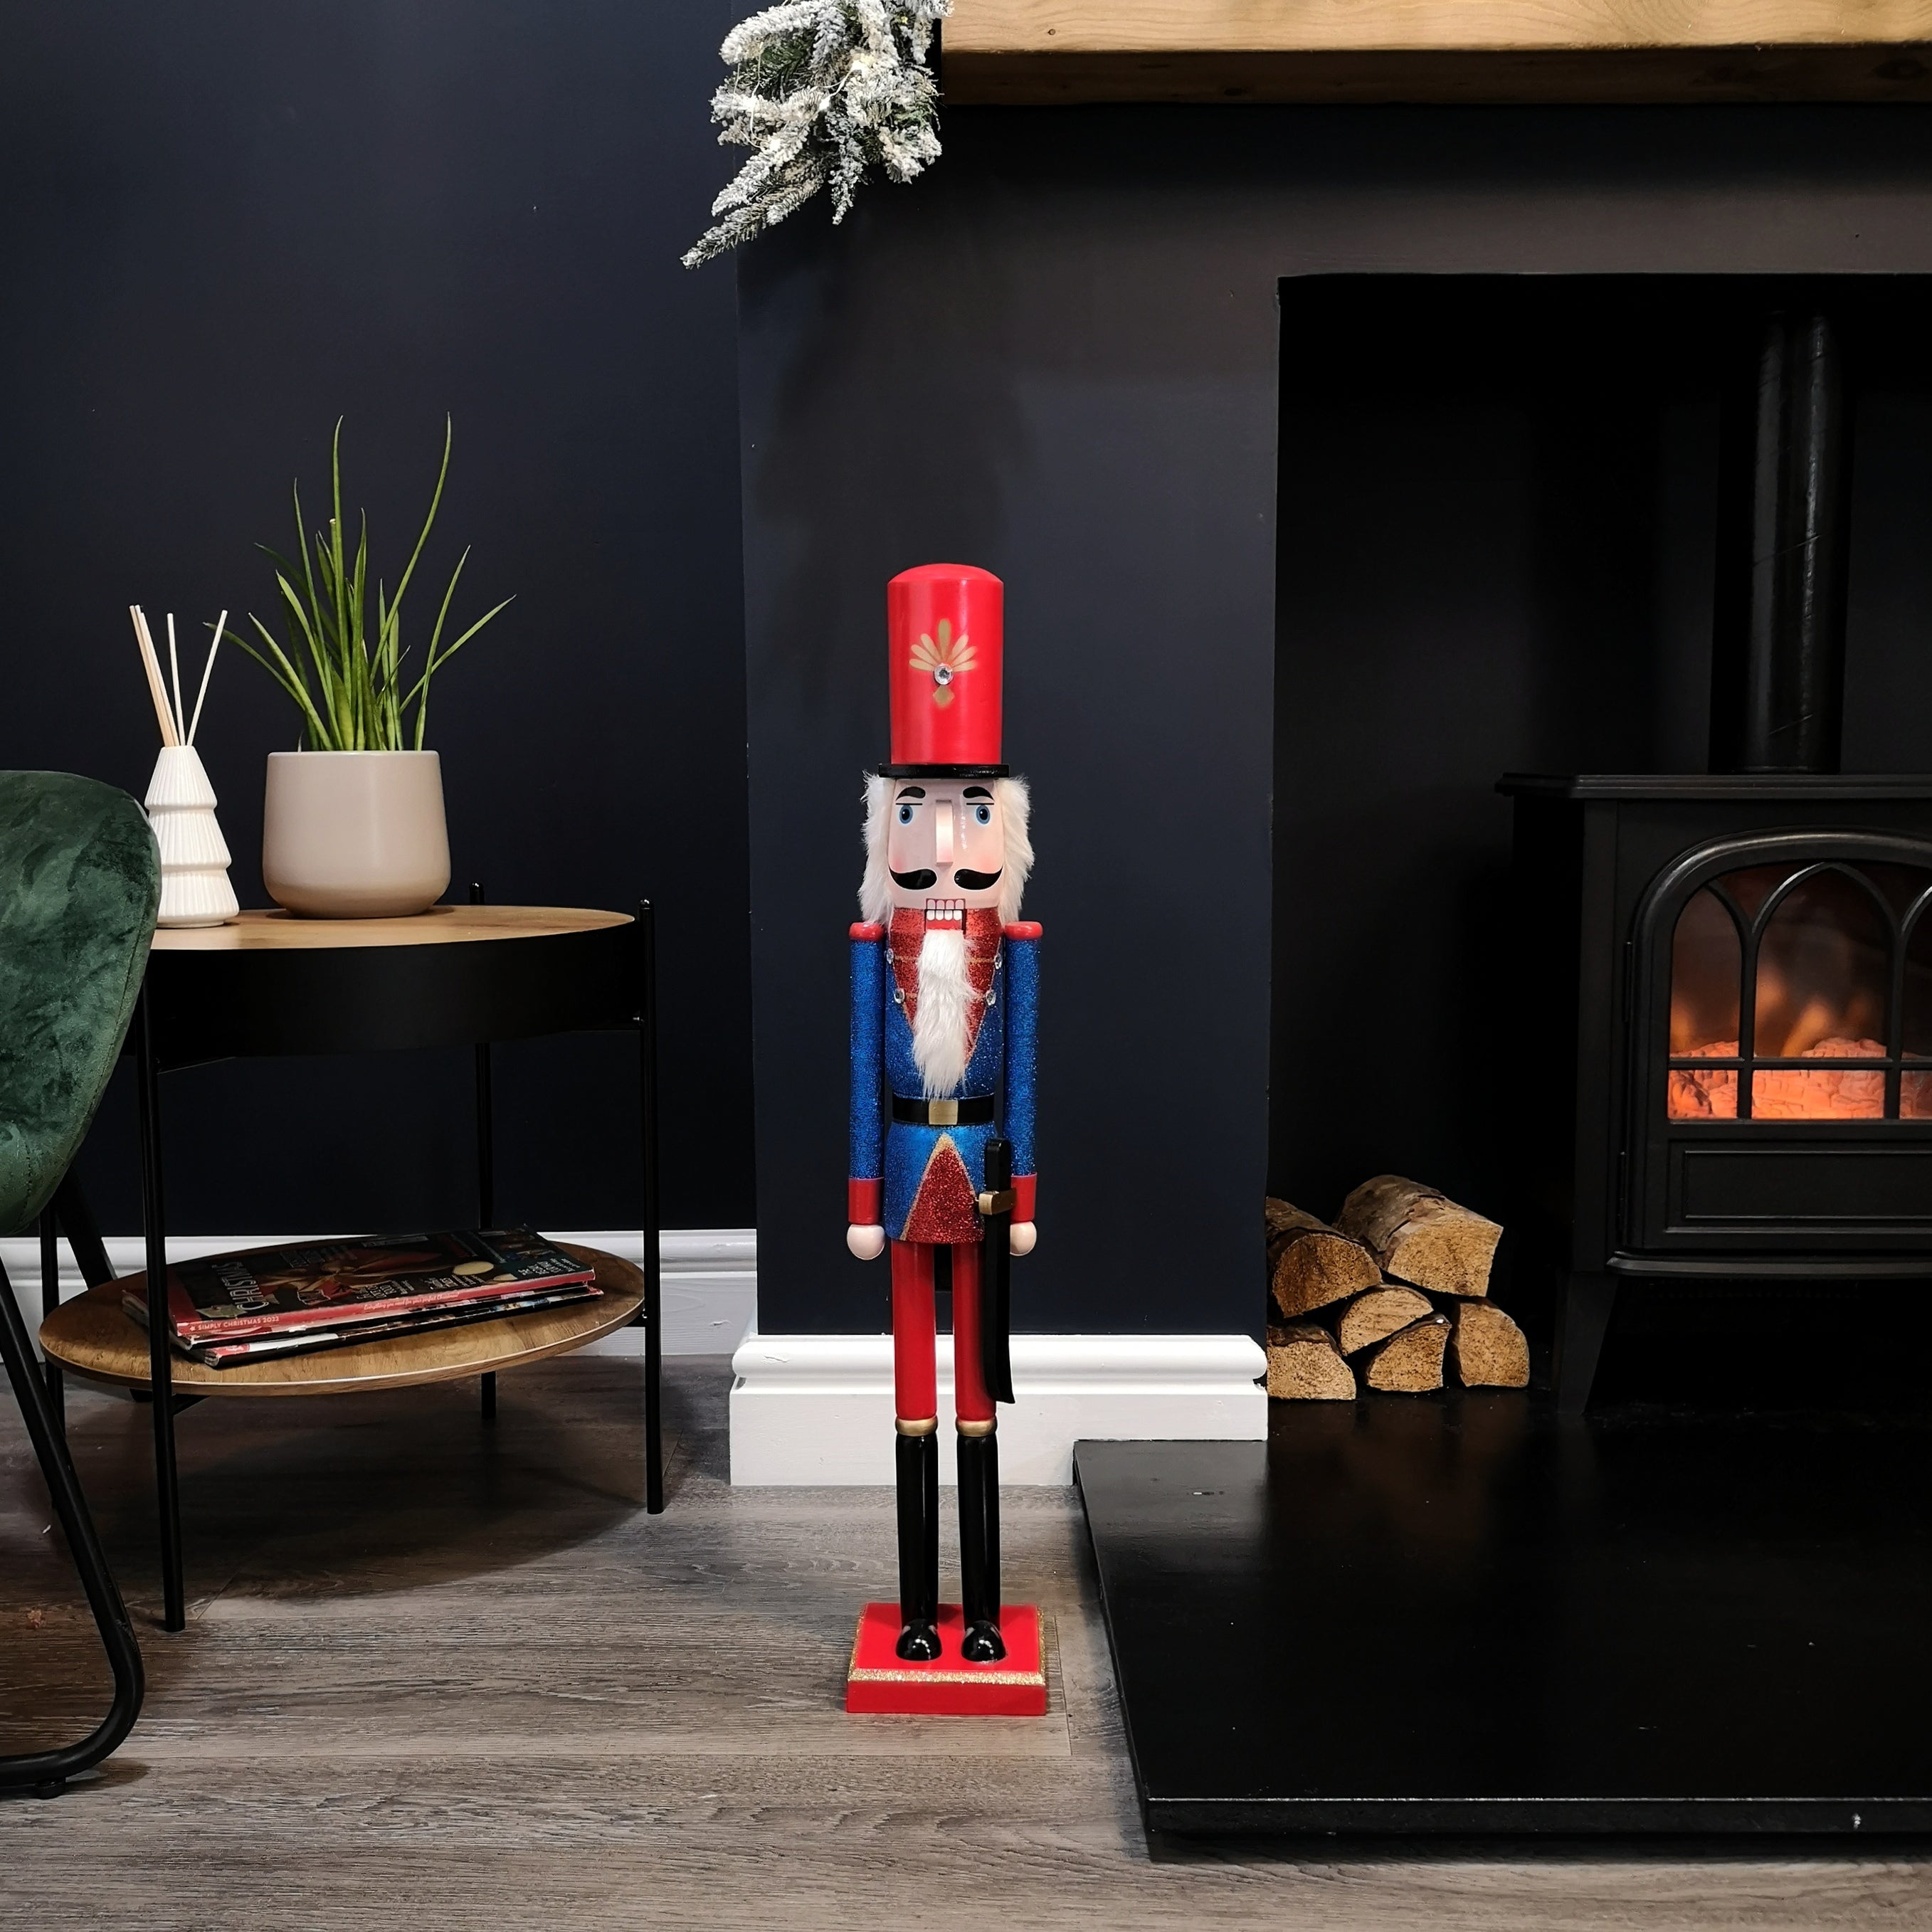 70cm Indoor Traditional Wooden Christmas Nutcracker Decoration in Blue